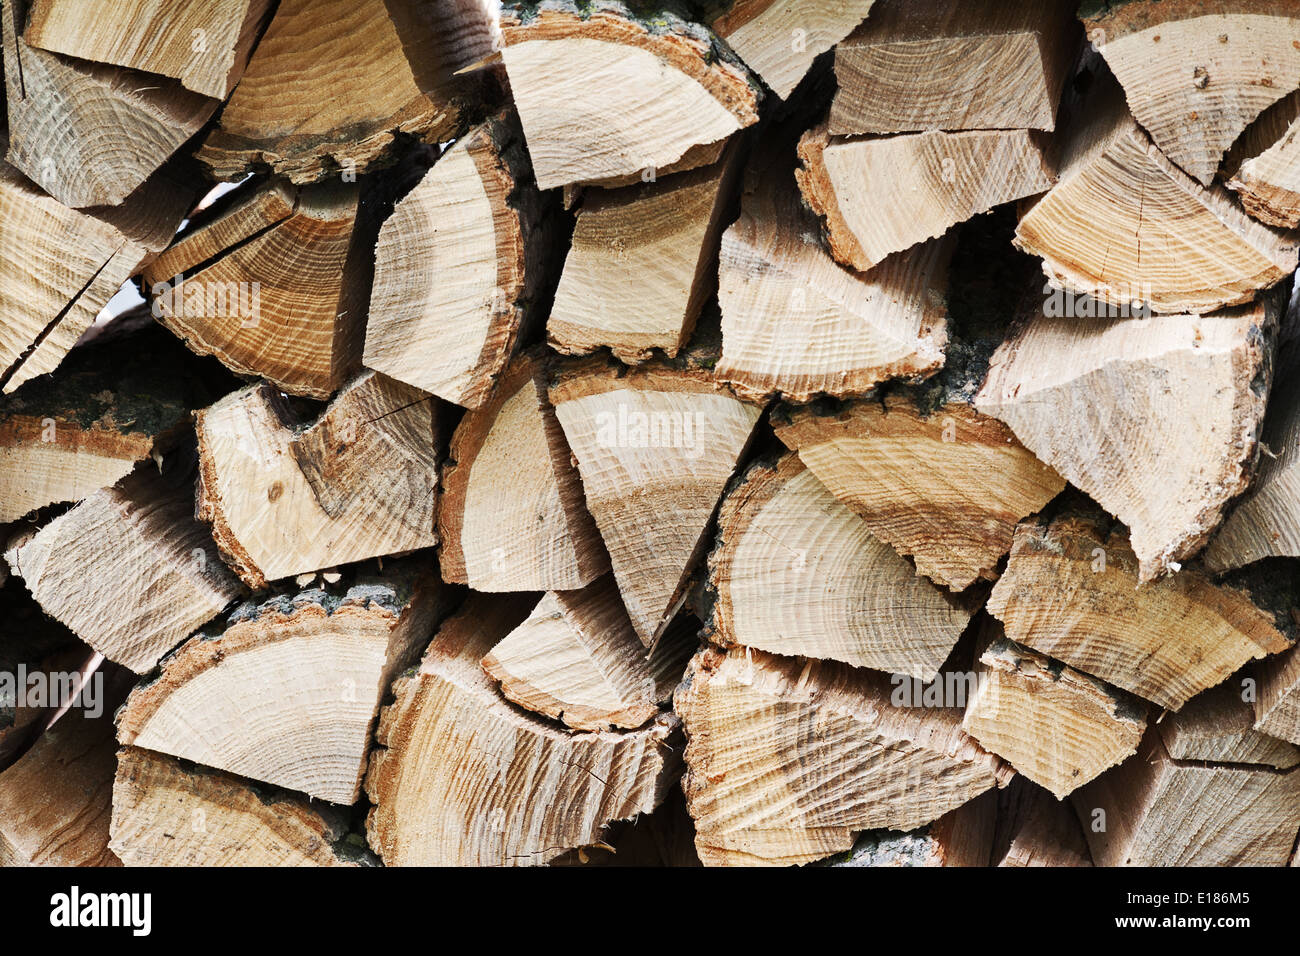 Dry chopped firewood logs in pile. Nature background. Stock Photo